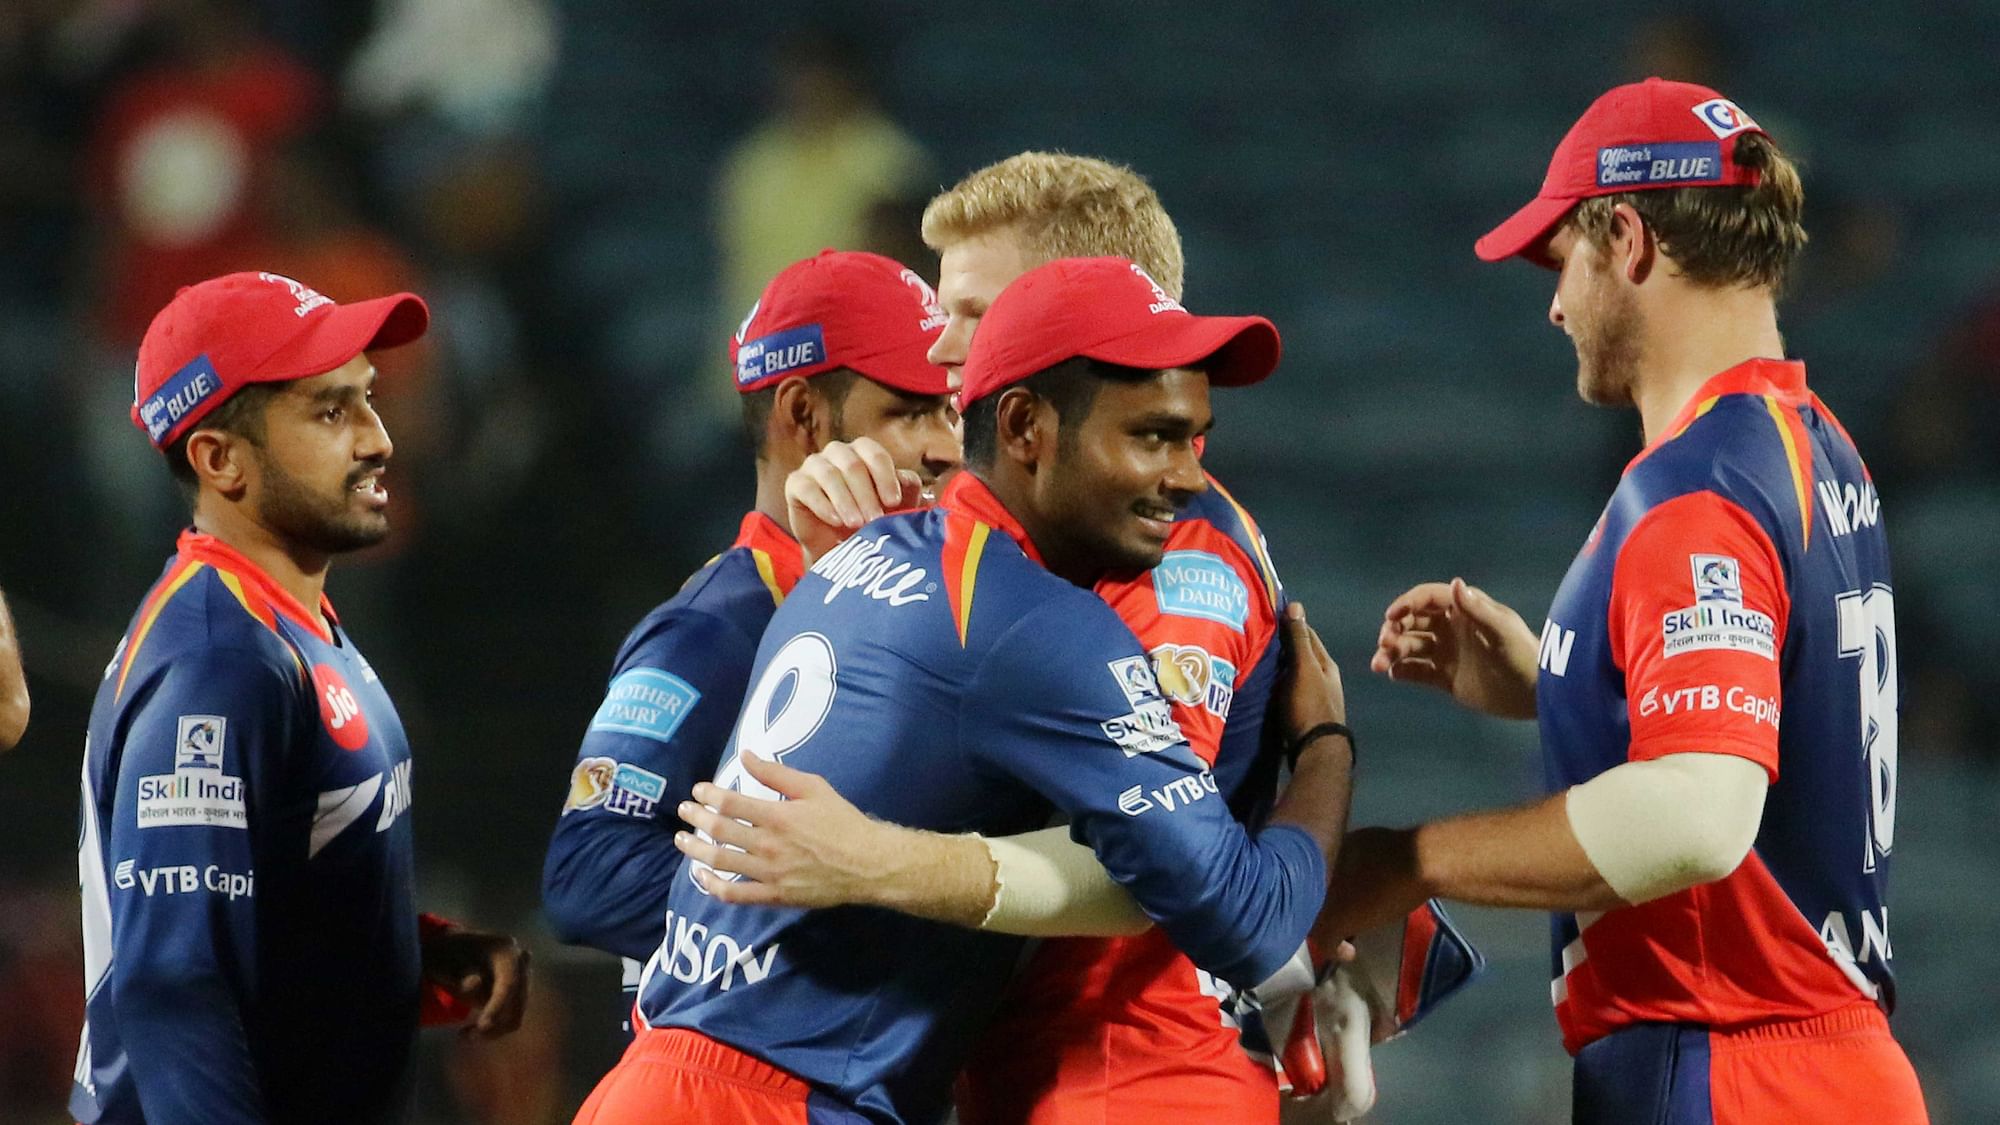 Delhi Daredevils players celebrate after beating RPS. (Photo: BCCI)